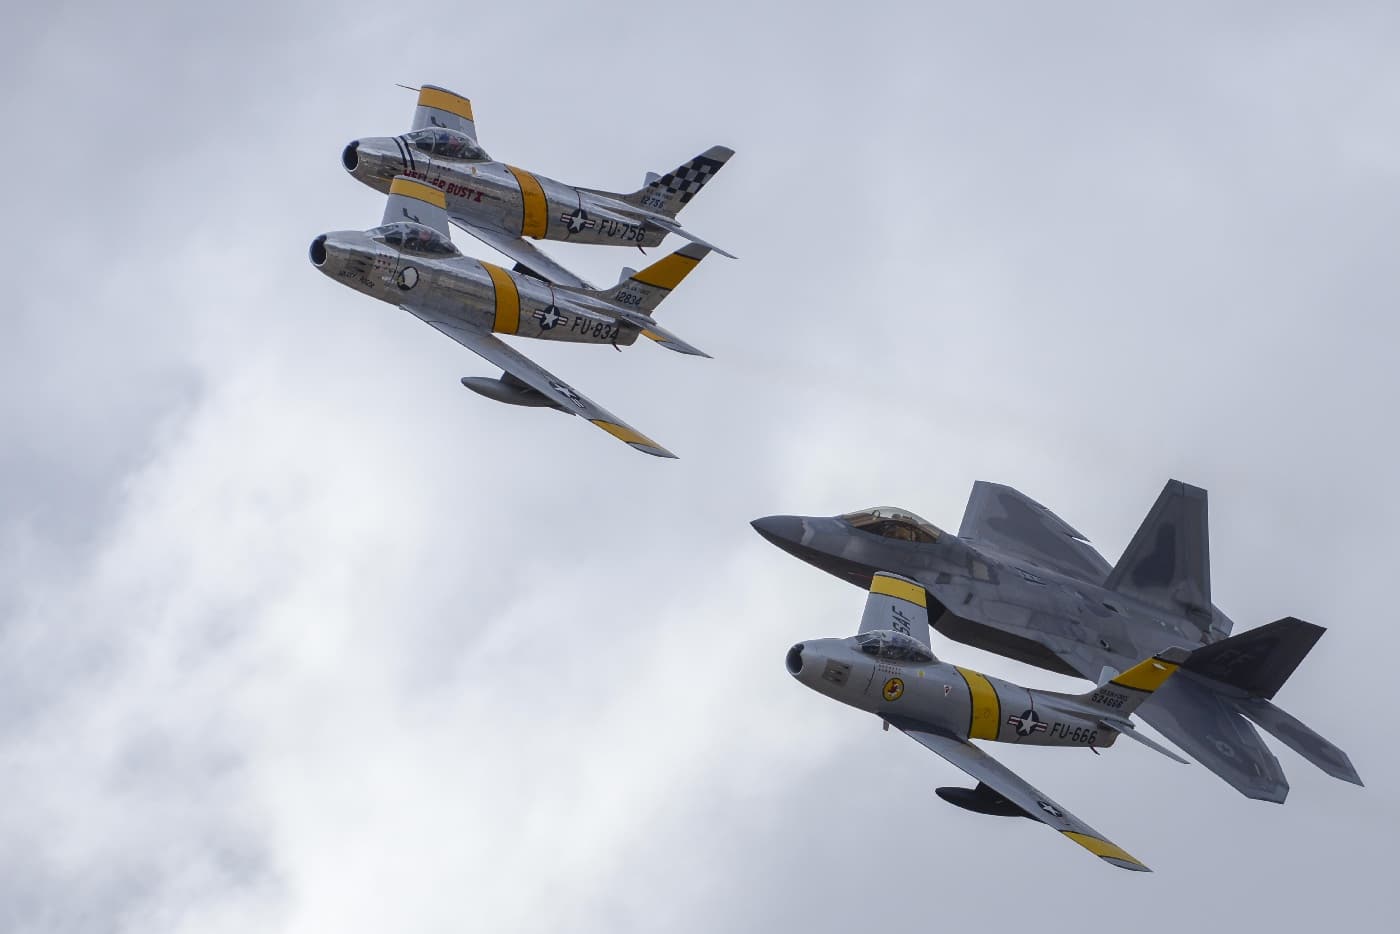 In this image, three F-86 fighters fly formation with an F-22 Raptor. The F-86 populates many an air museum while the F-22 is a front line fighter in current service. The Sabre proved versatile and adaptable, just as the F-22 is showing it is today.